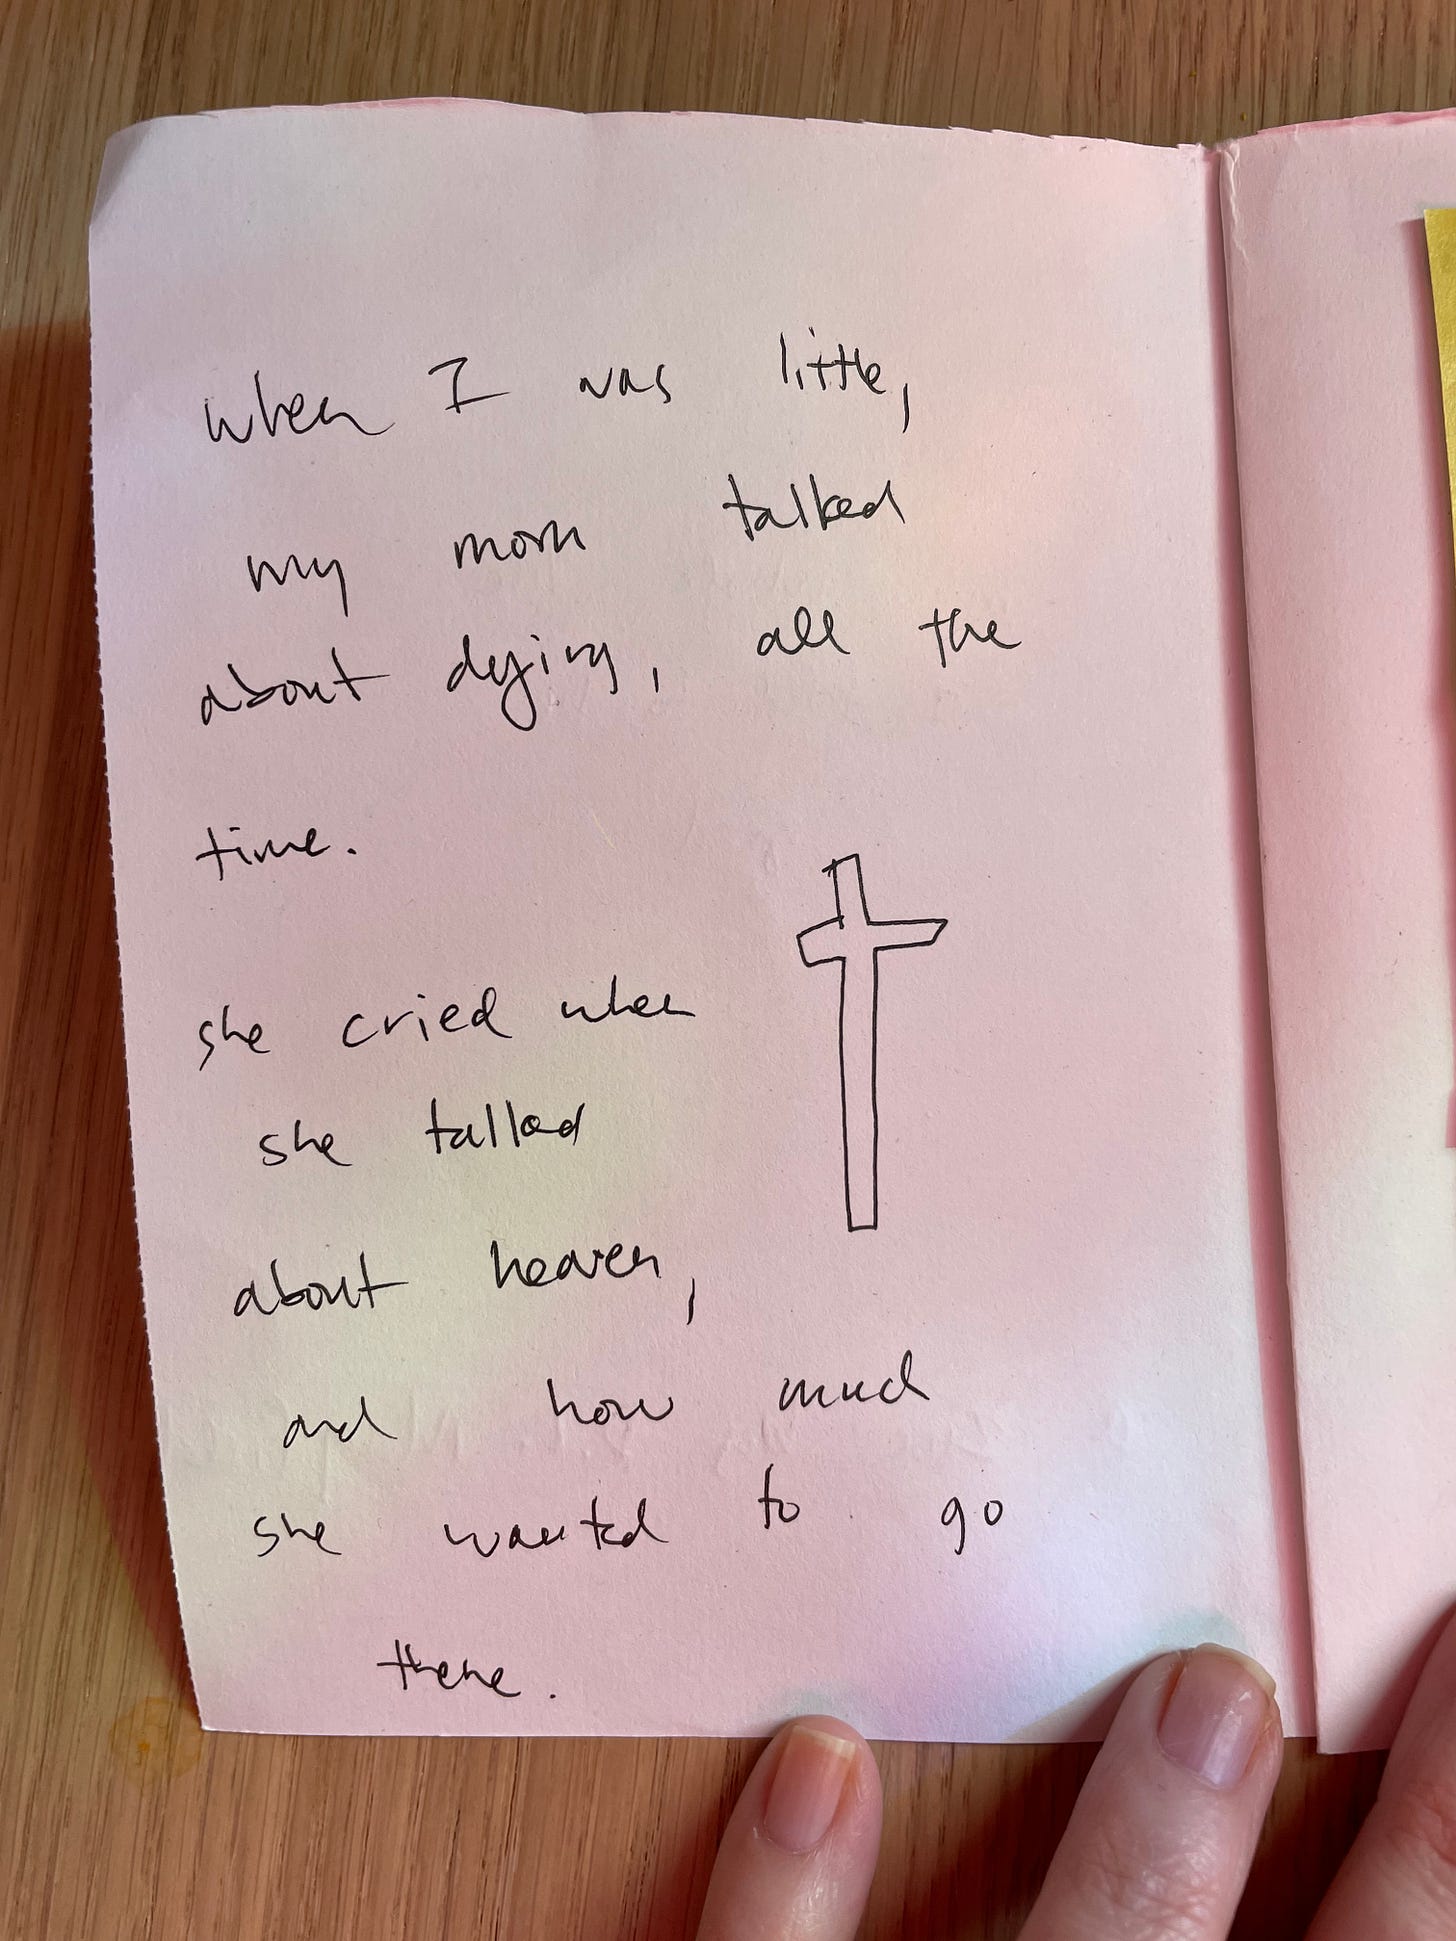 another white page. black text says when I was little, my mom talked about dying, all the time. she cried when she talked about heaven, and how much she wanted to go there